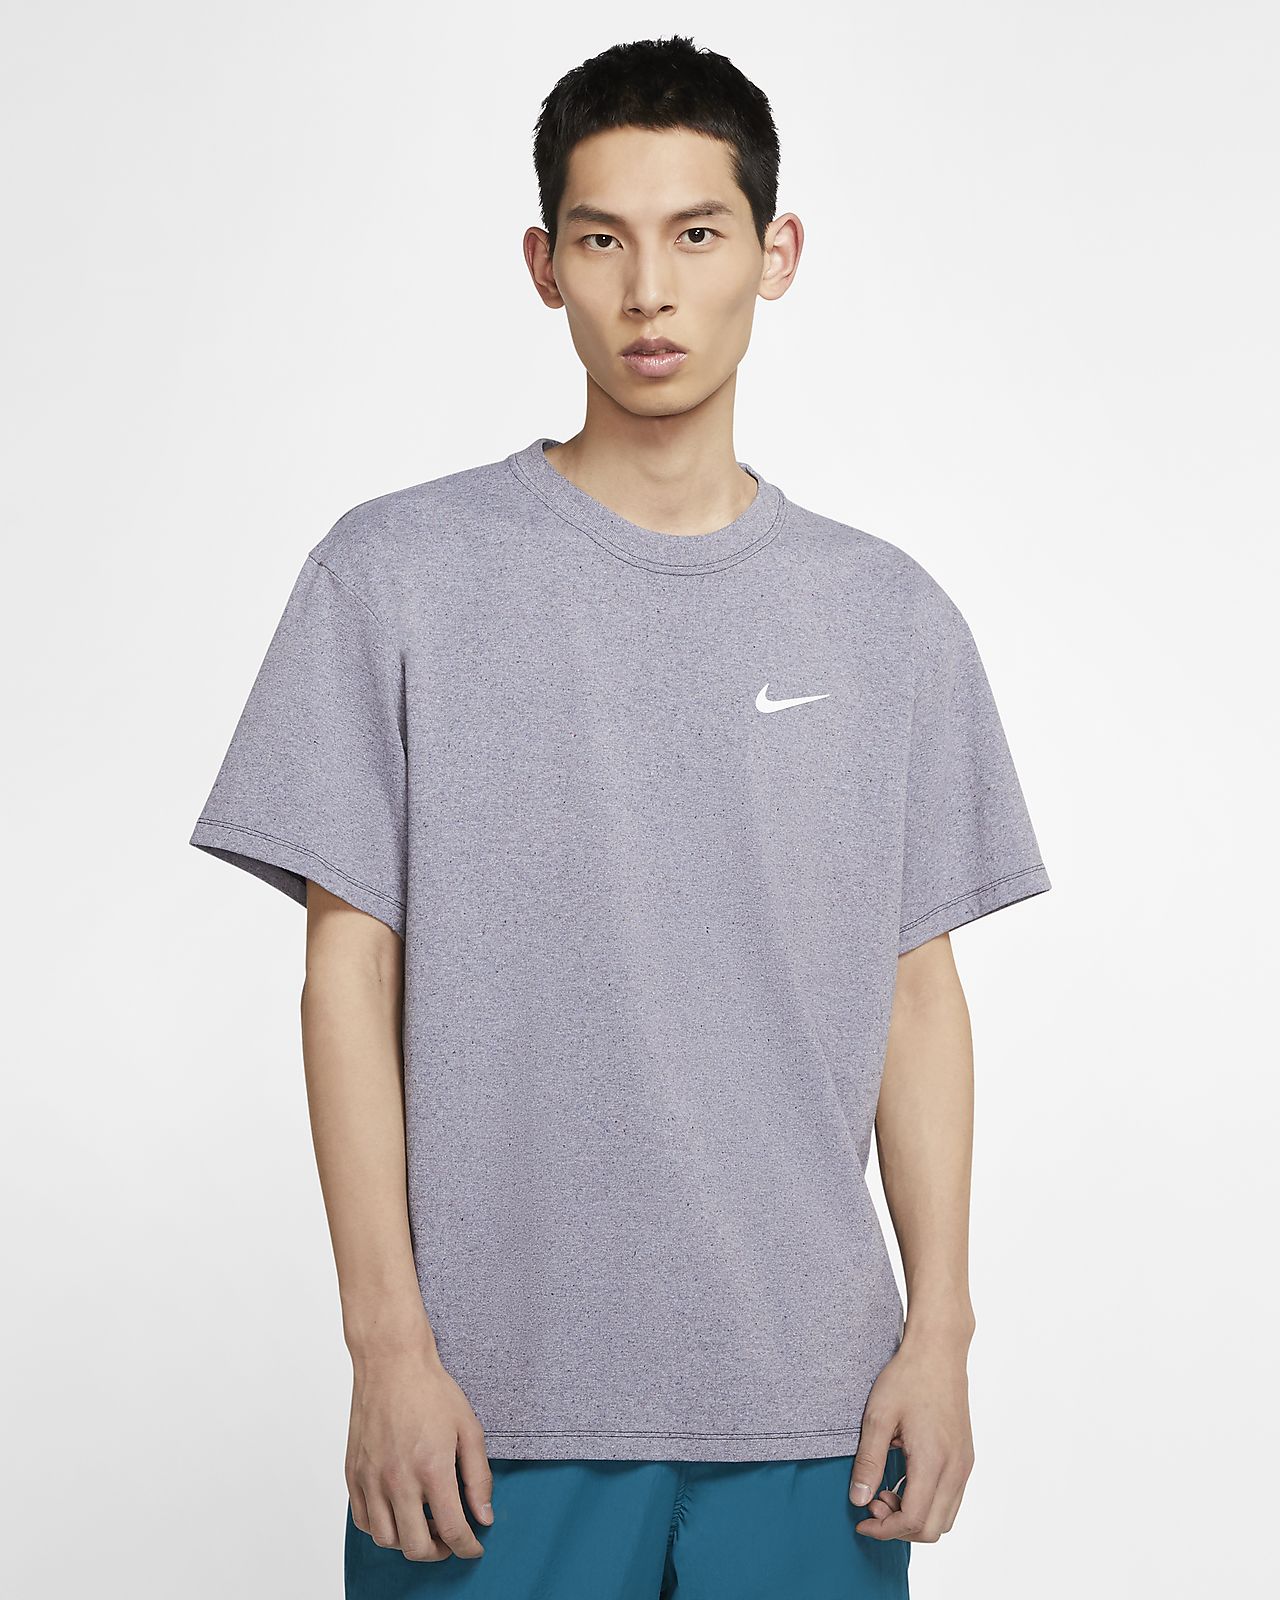 nike space t shirt online -